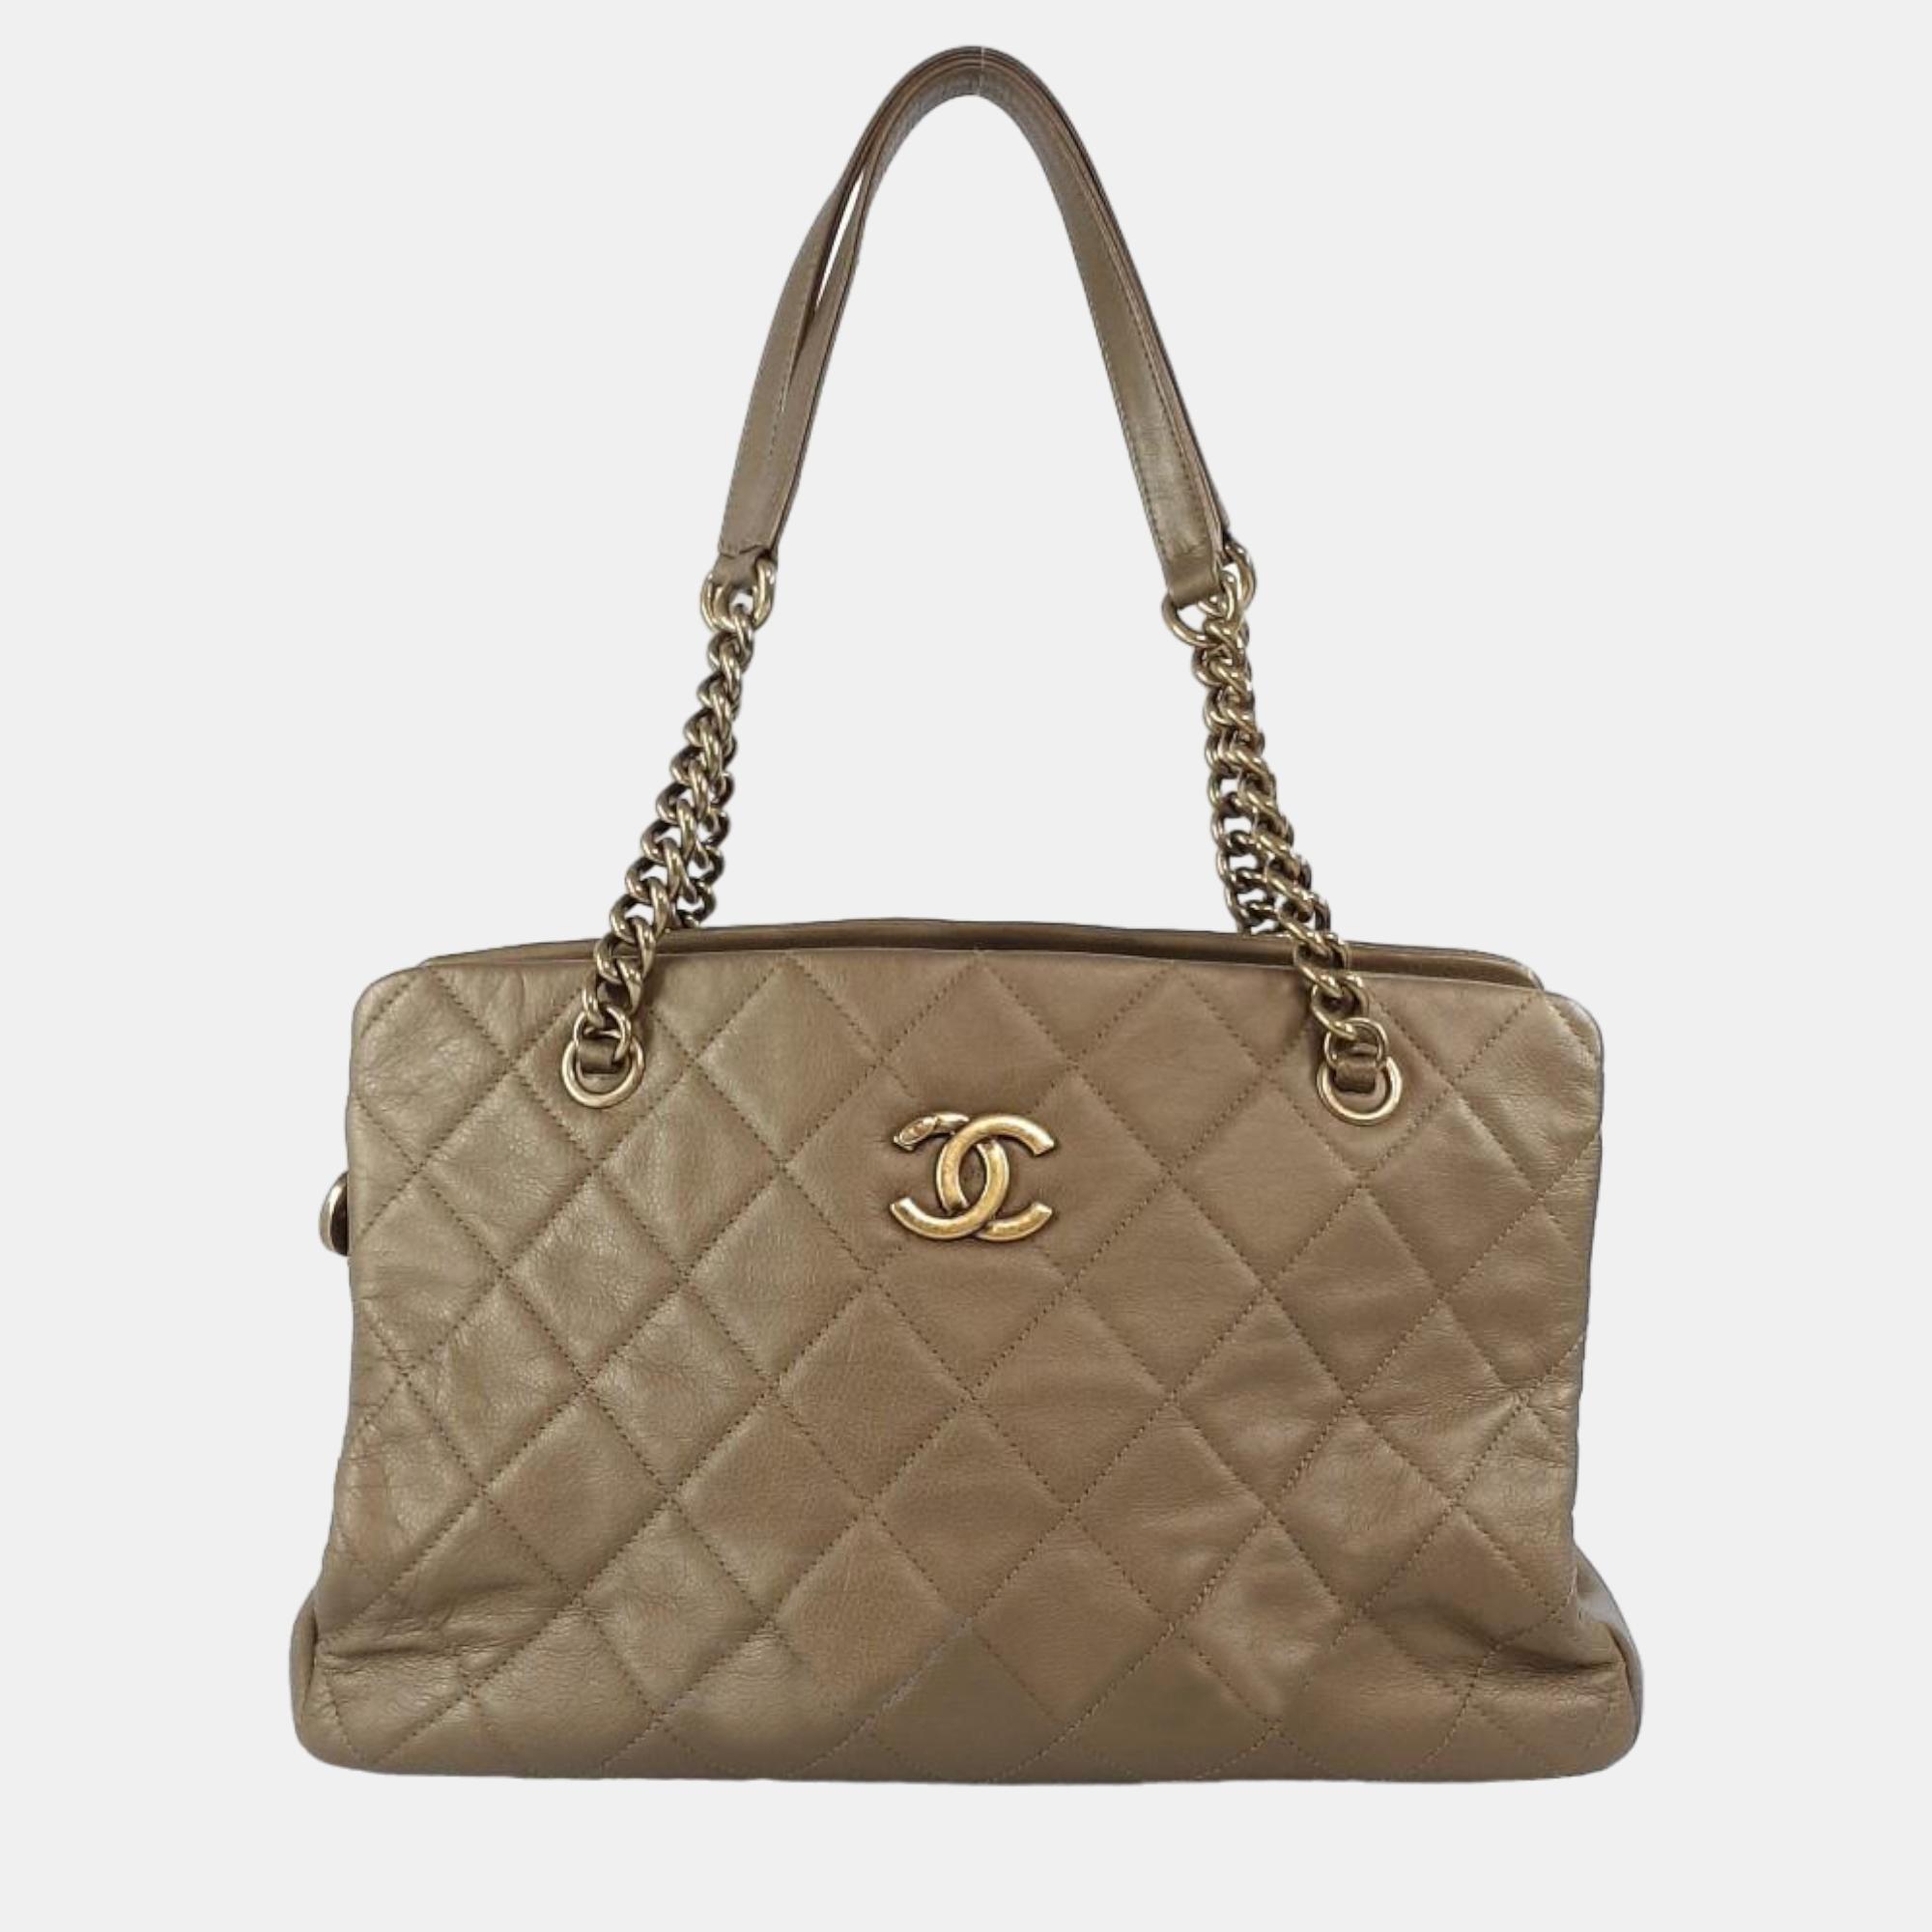 Chanel brown leather cc crown tote bag